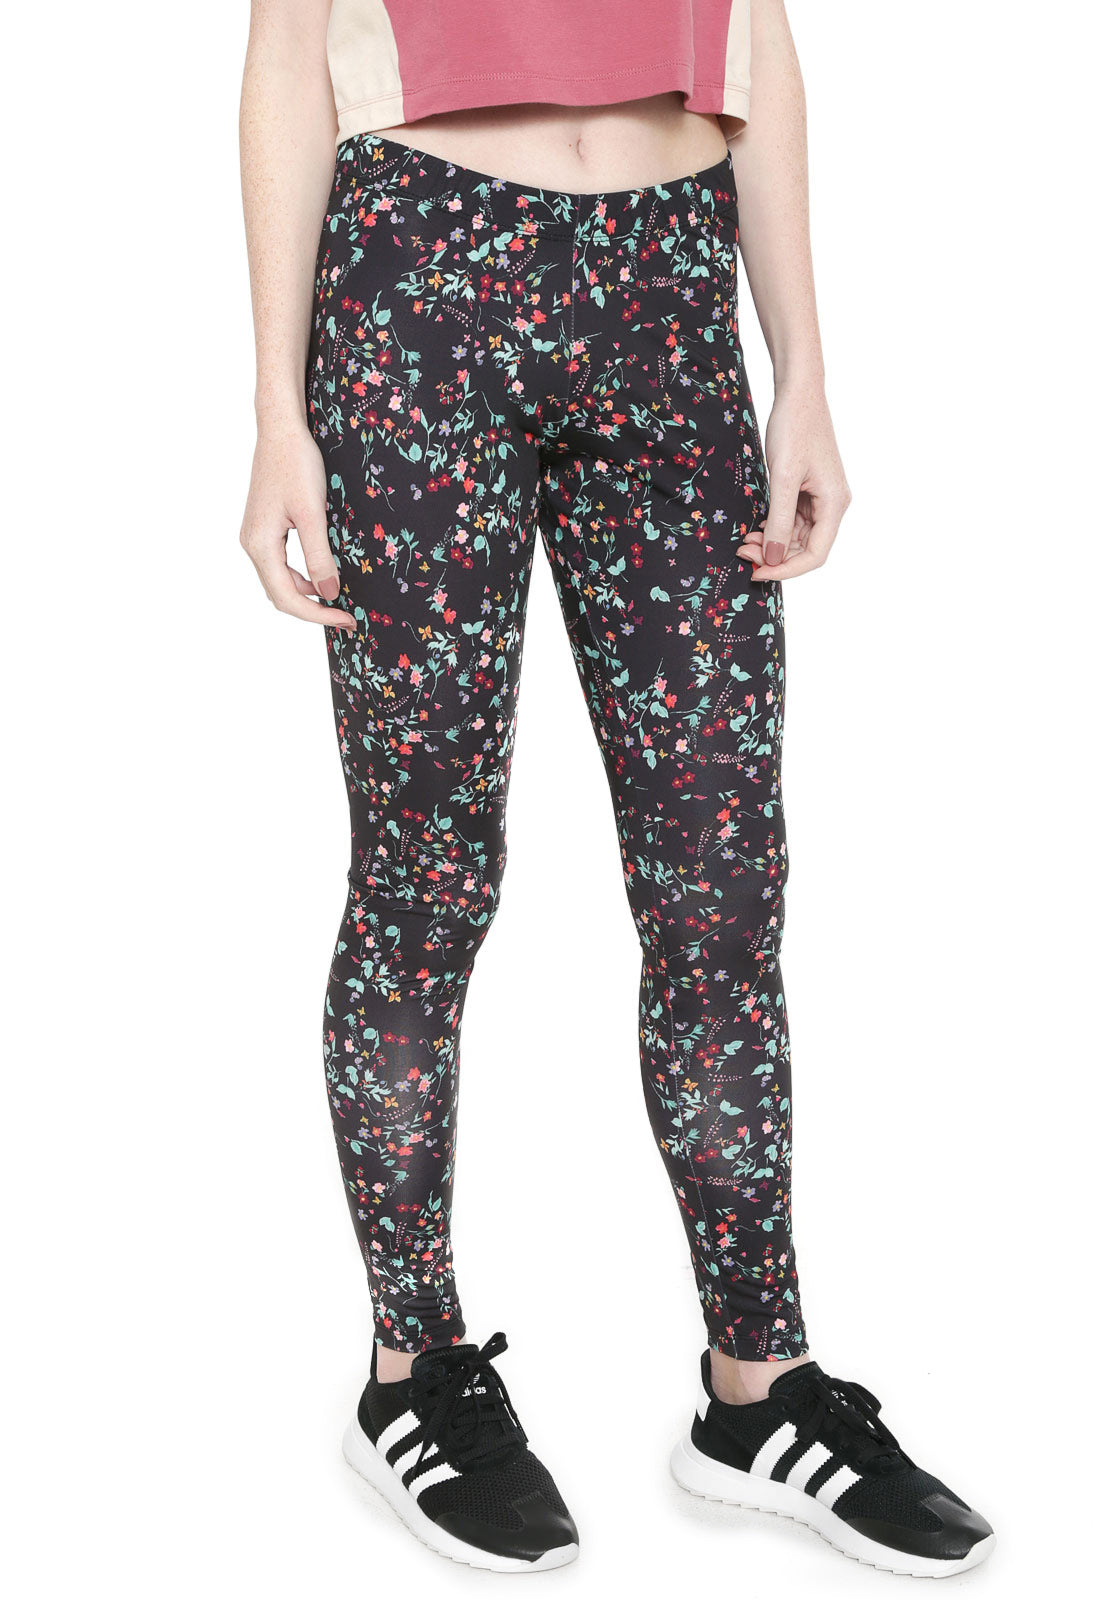 Stylish adidas Originals Leggings with Floral and Bird Pattern